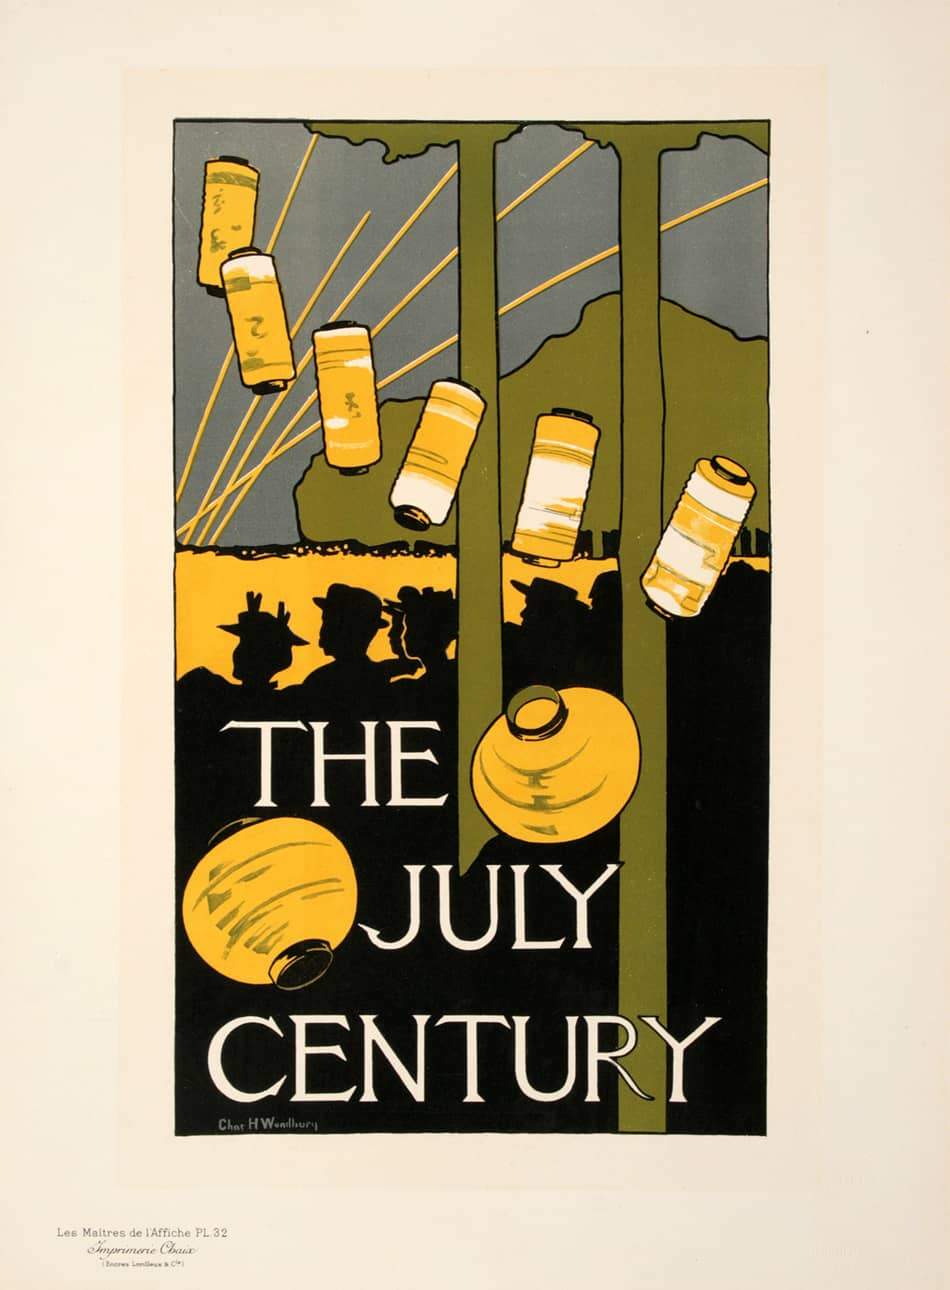 Original Maitres de L'Affiche Pl 32 by Charles Woodbury for The July Century